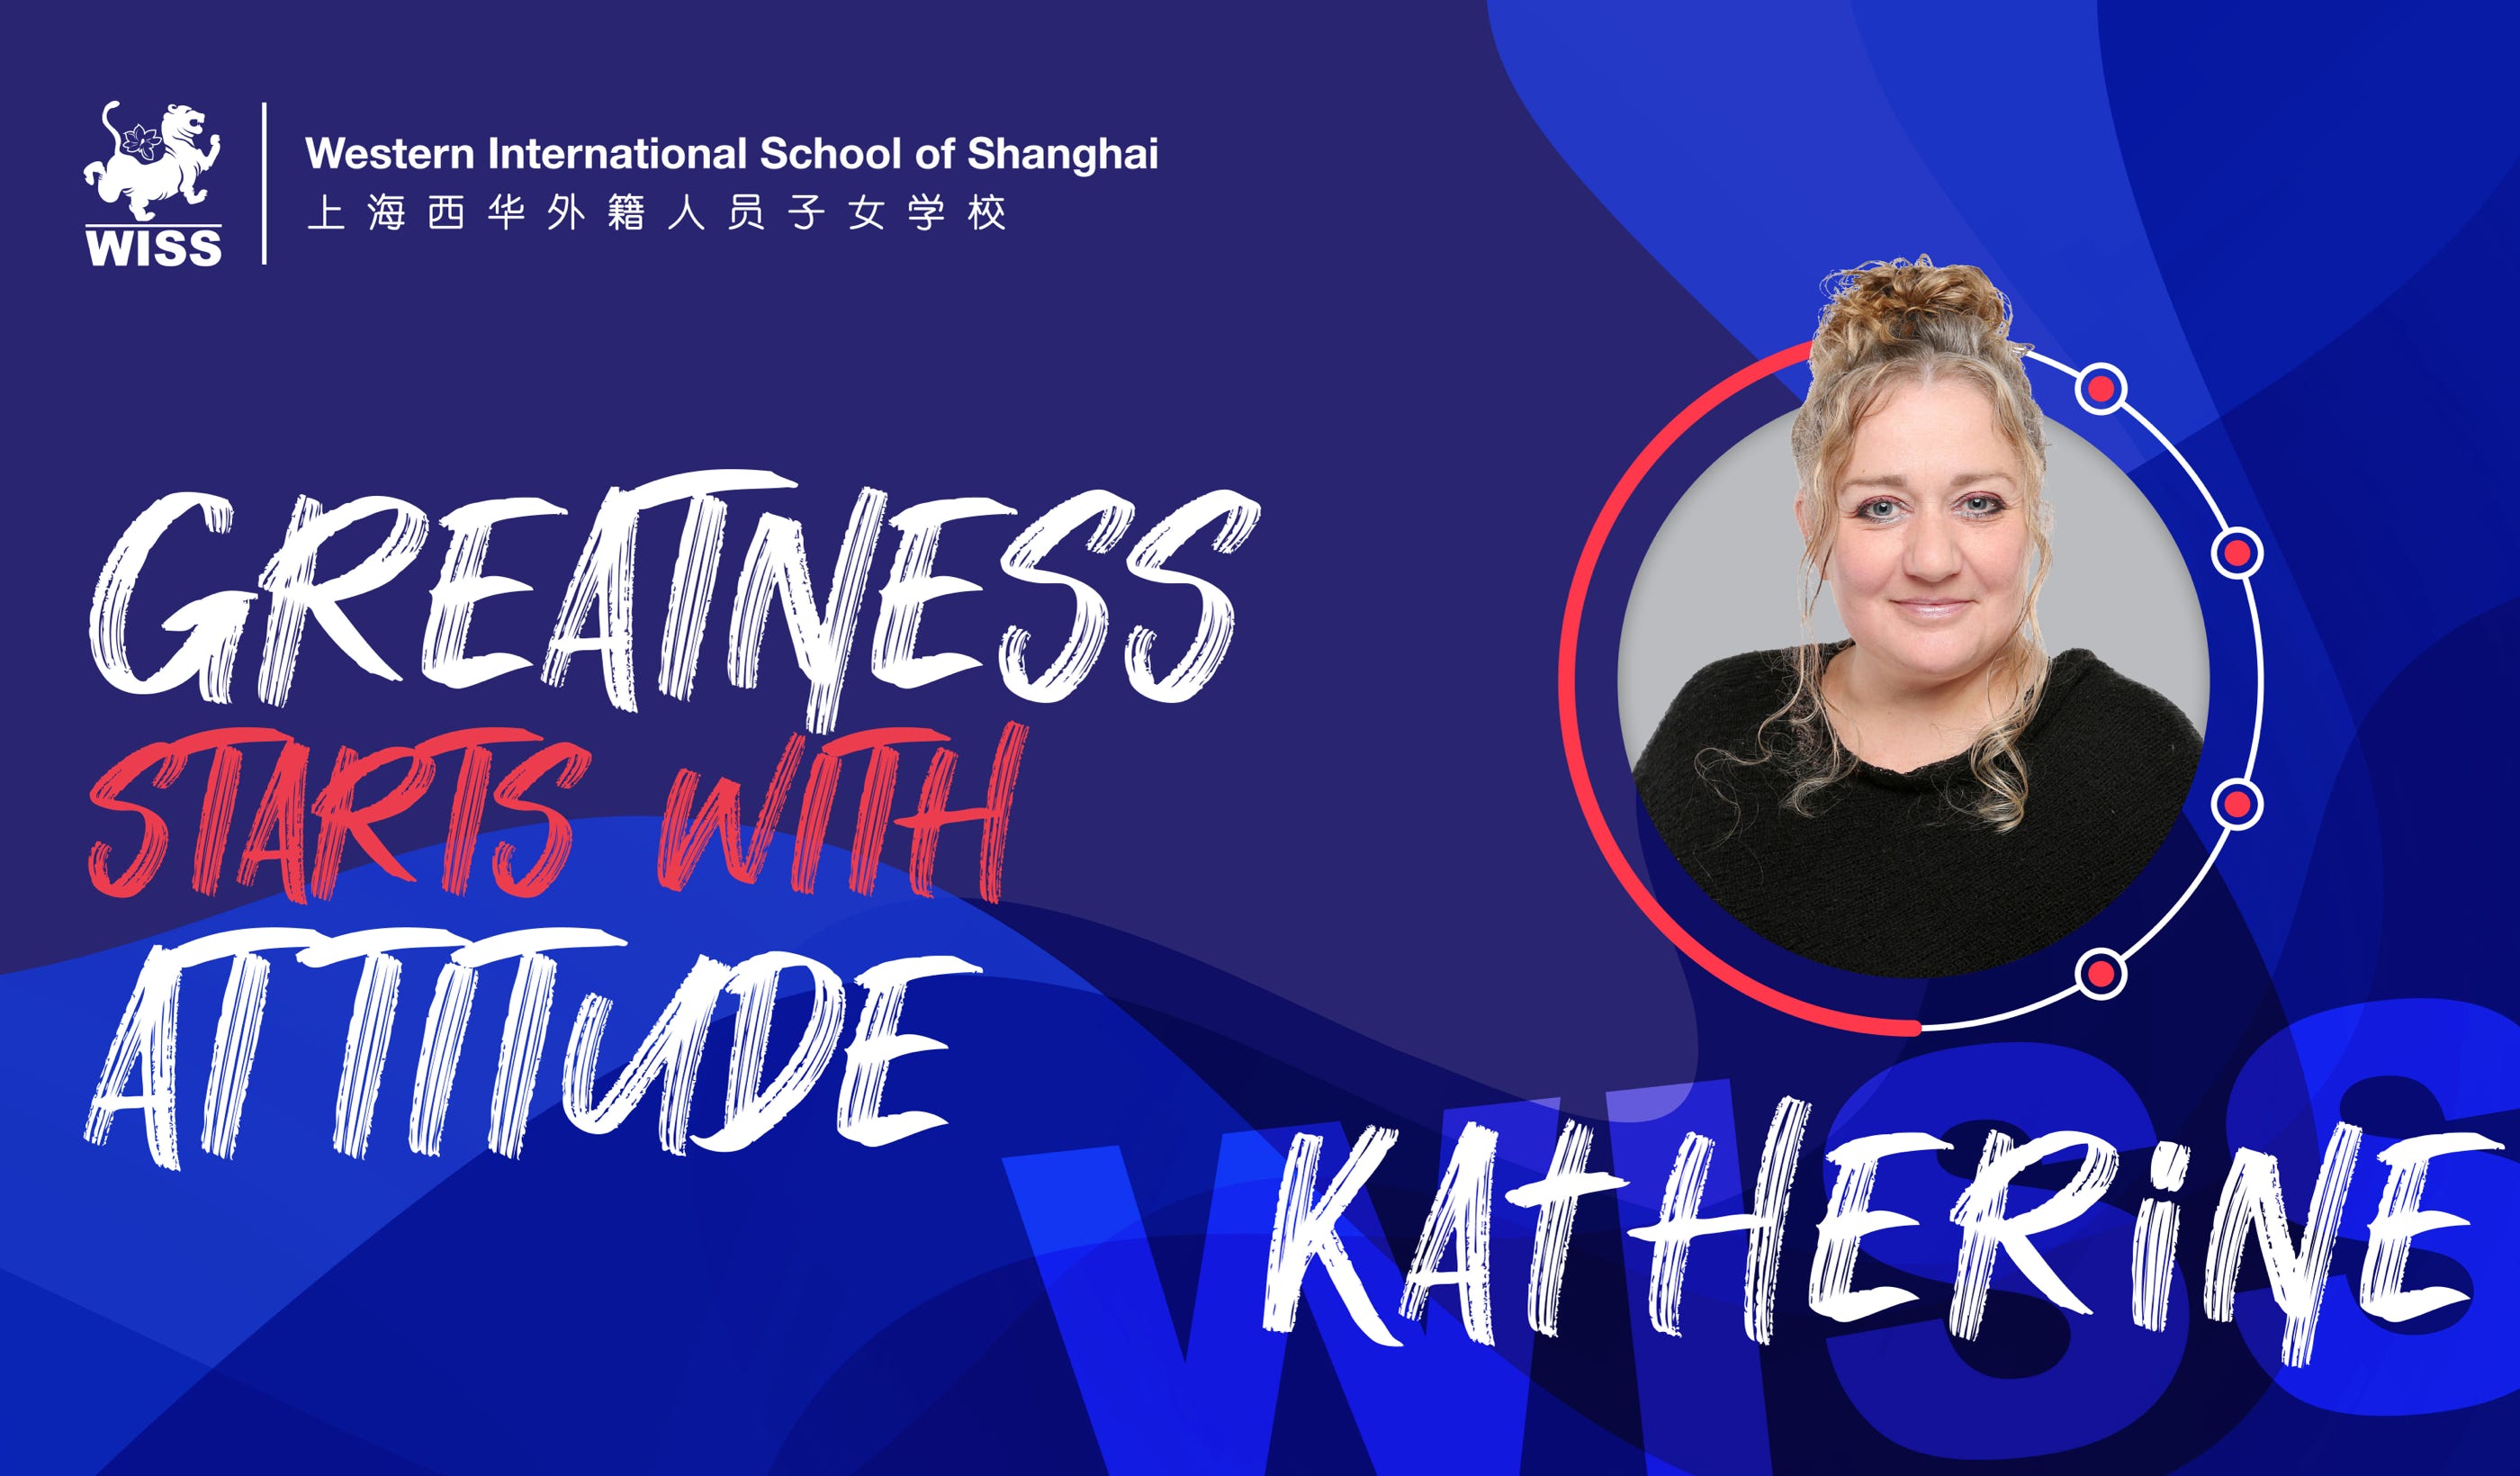 Nestled within the vibrant and bustling heart of Shanghai lies the Western International School of Shanghai (WISS) - a place where enchantment and learning converge to create magic every day. Today, we are delighted to share the inspiring story of Catherine Langford, a dedicated educator from Canada, who embodies our series theme, "Greatness Starts With Attitude."